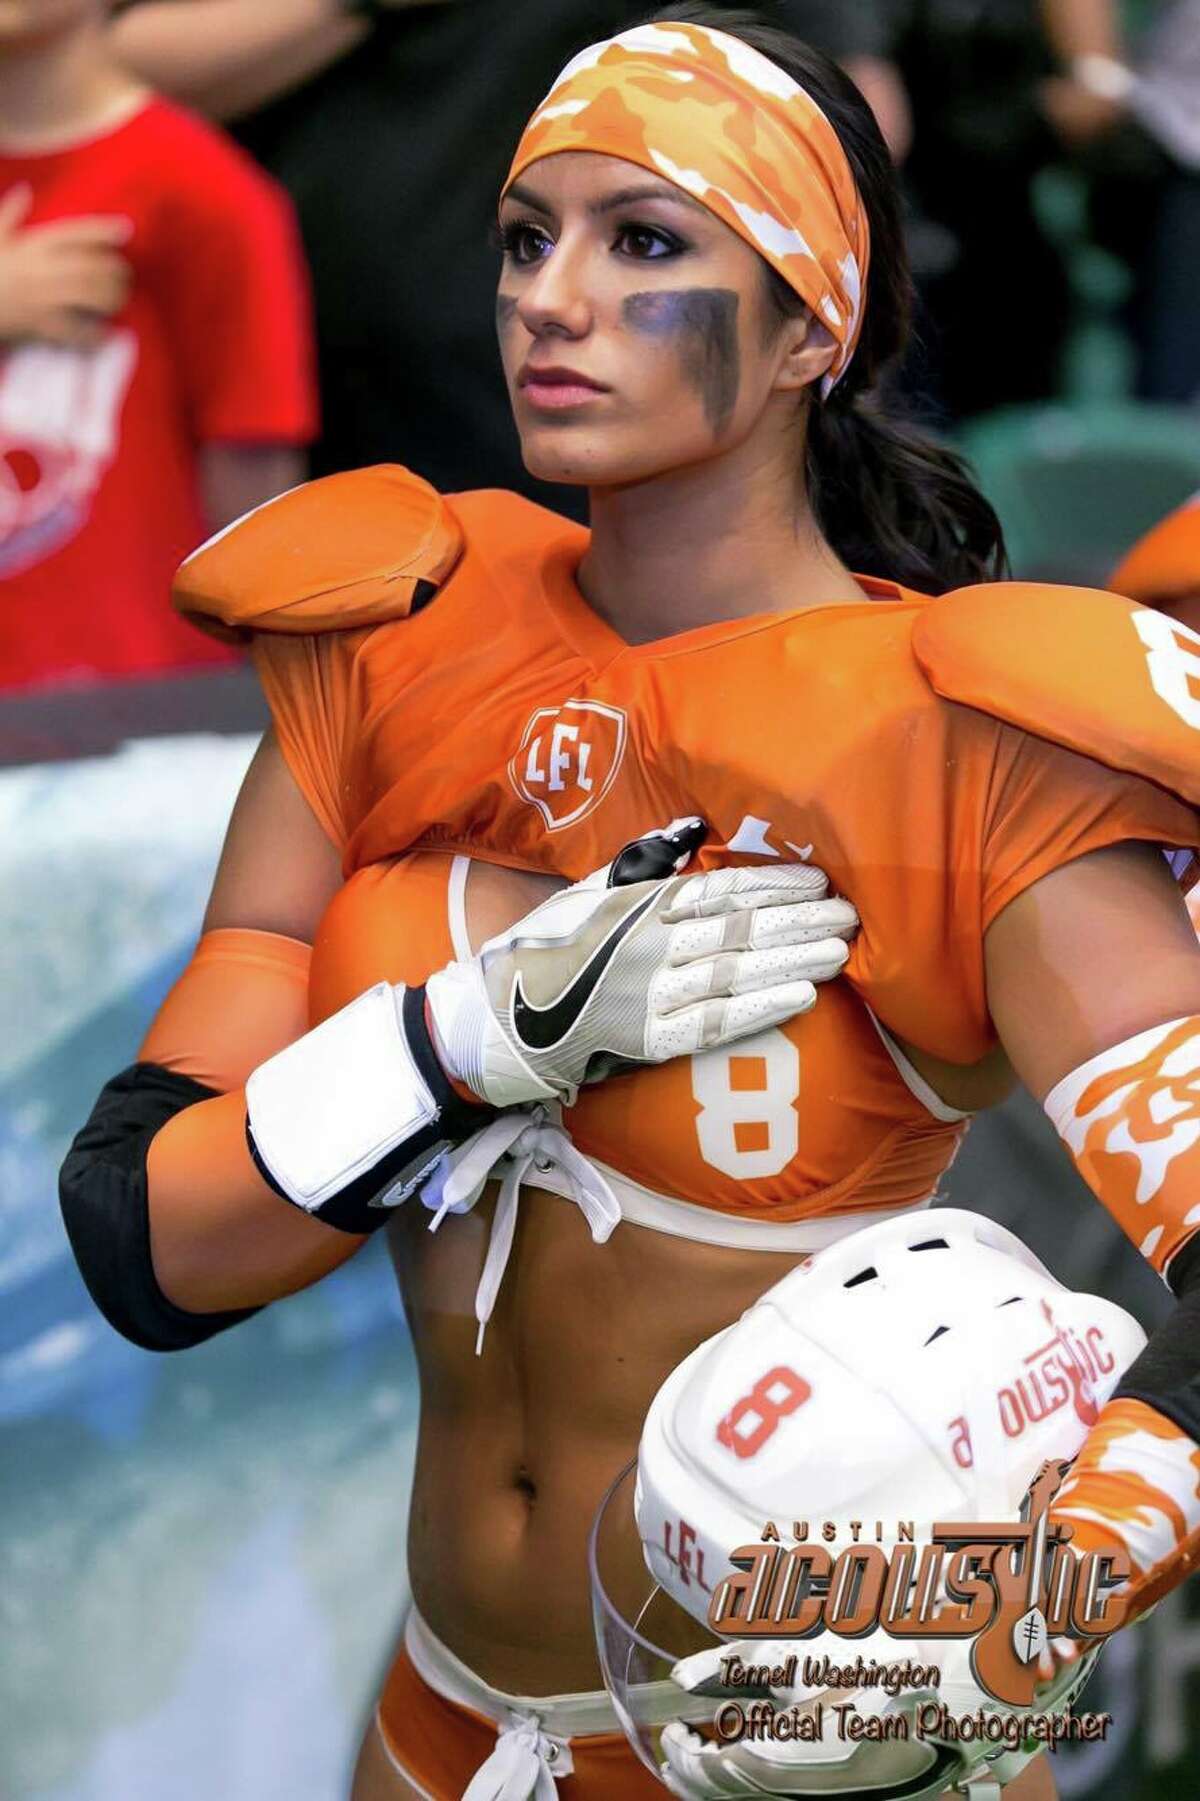 Meet Chasity Morales, San Antonio native and one of the LFL's 'hottest'